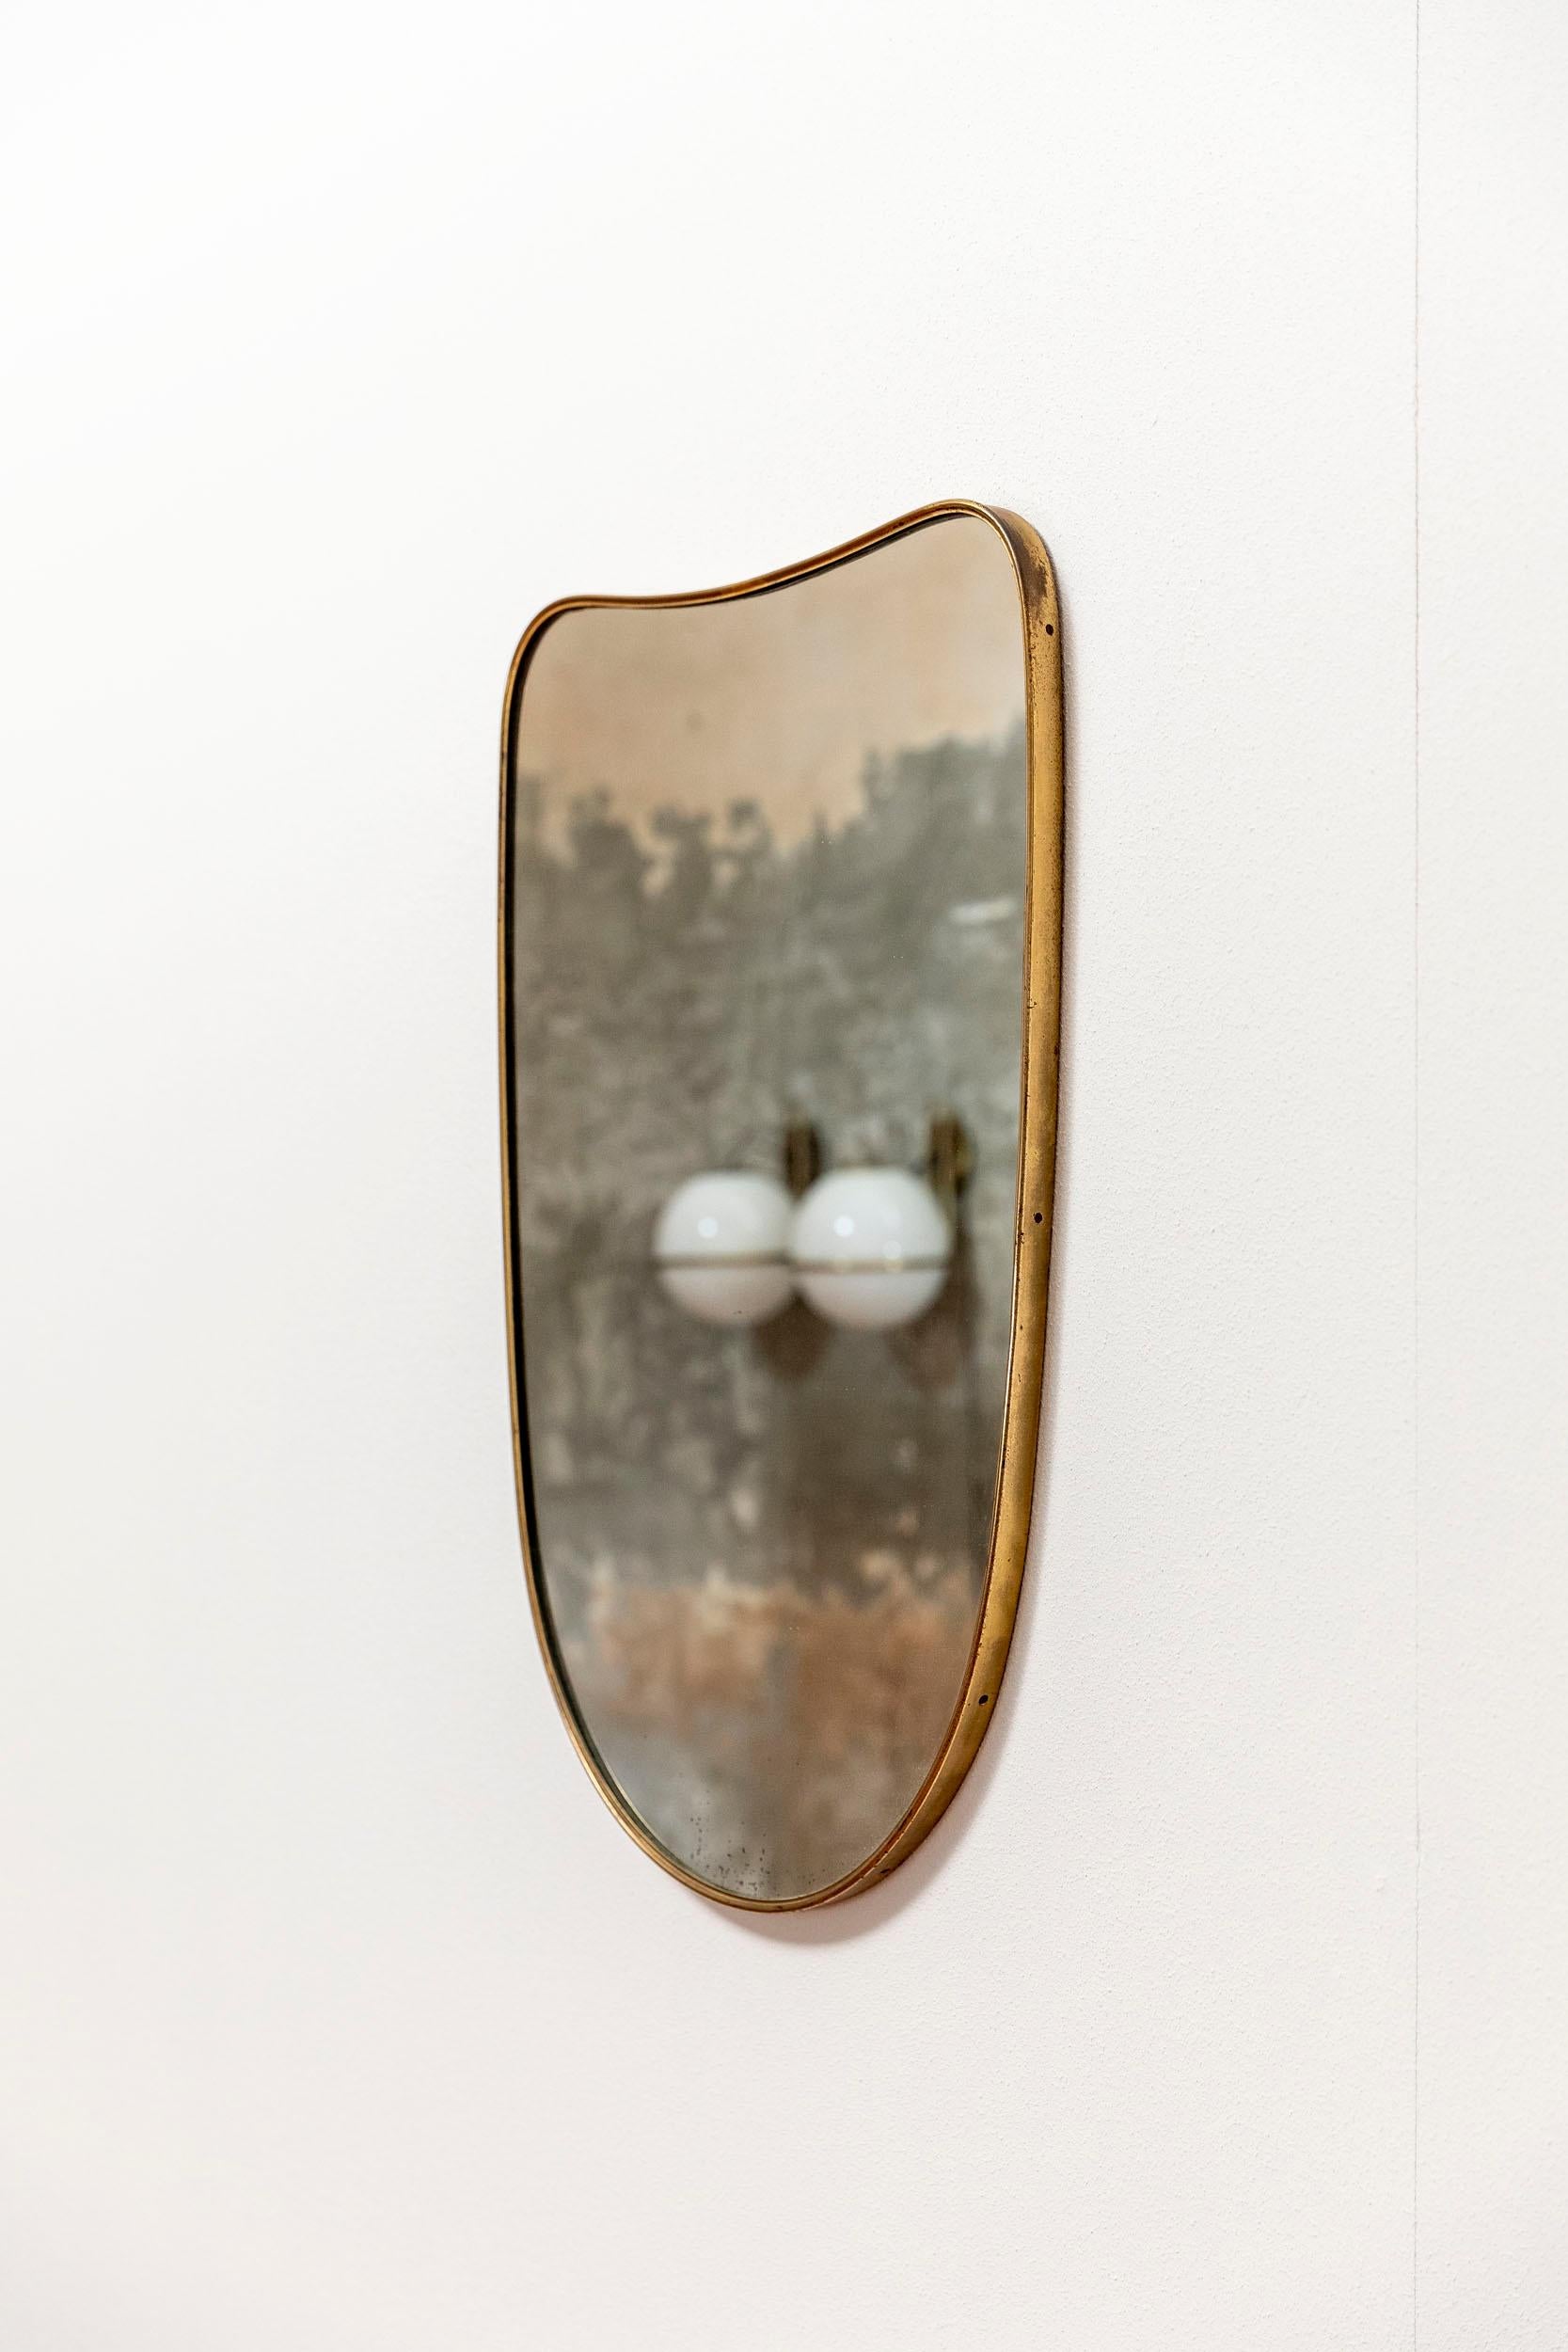 Italian Mid-Century Modern mirror inspired to Gio Ponti. 
Brass frame with elegant shaped and rounded corner.